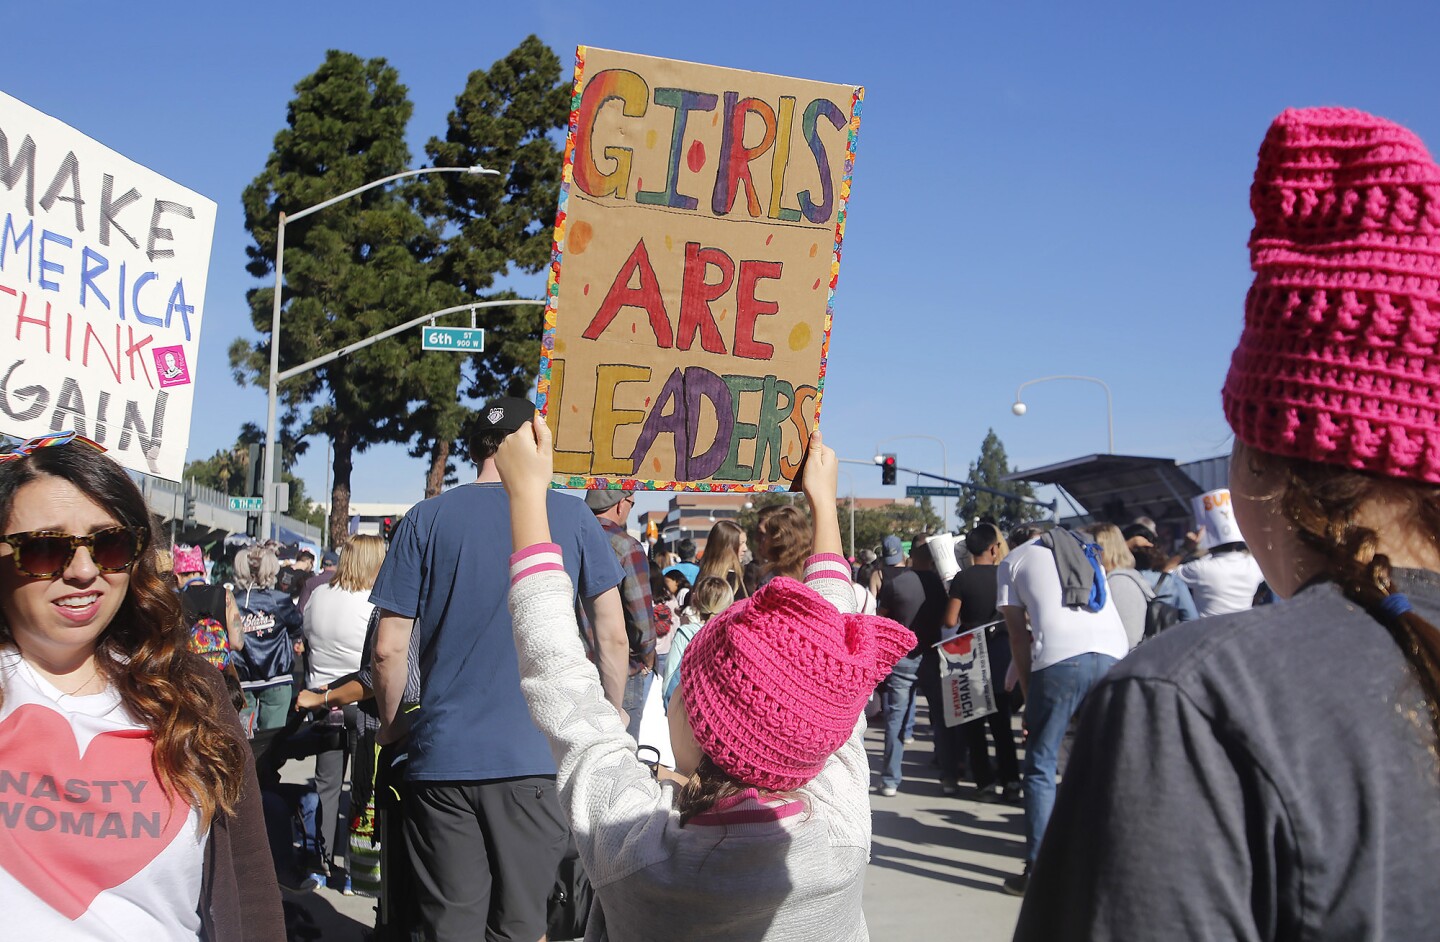 A youngster proudly holds a sign as she joins thousands of others gathered to participate in the Orange County Women's March in downtown Santa Ana on Jan. 19.